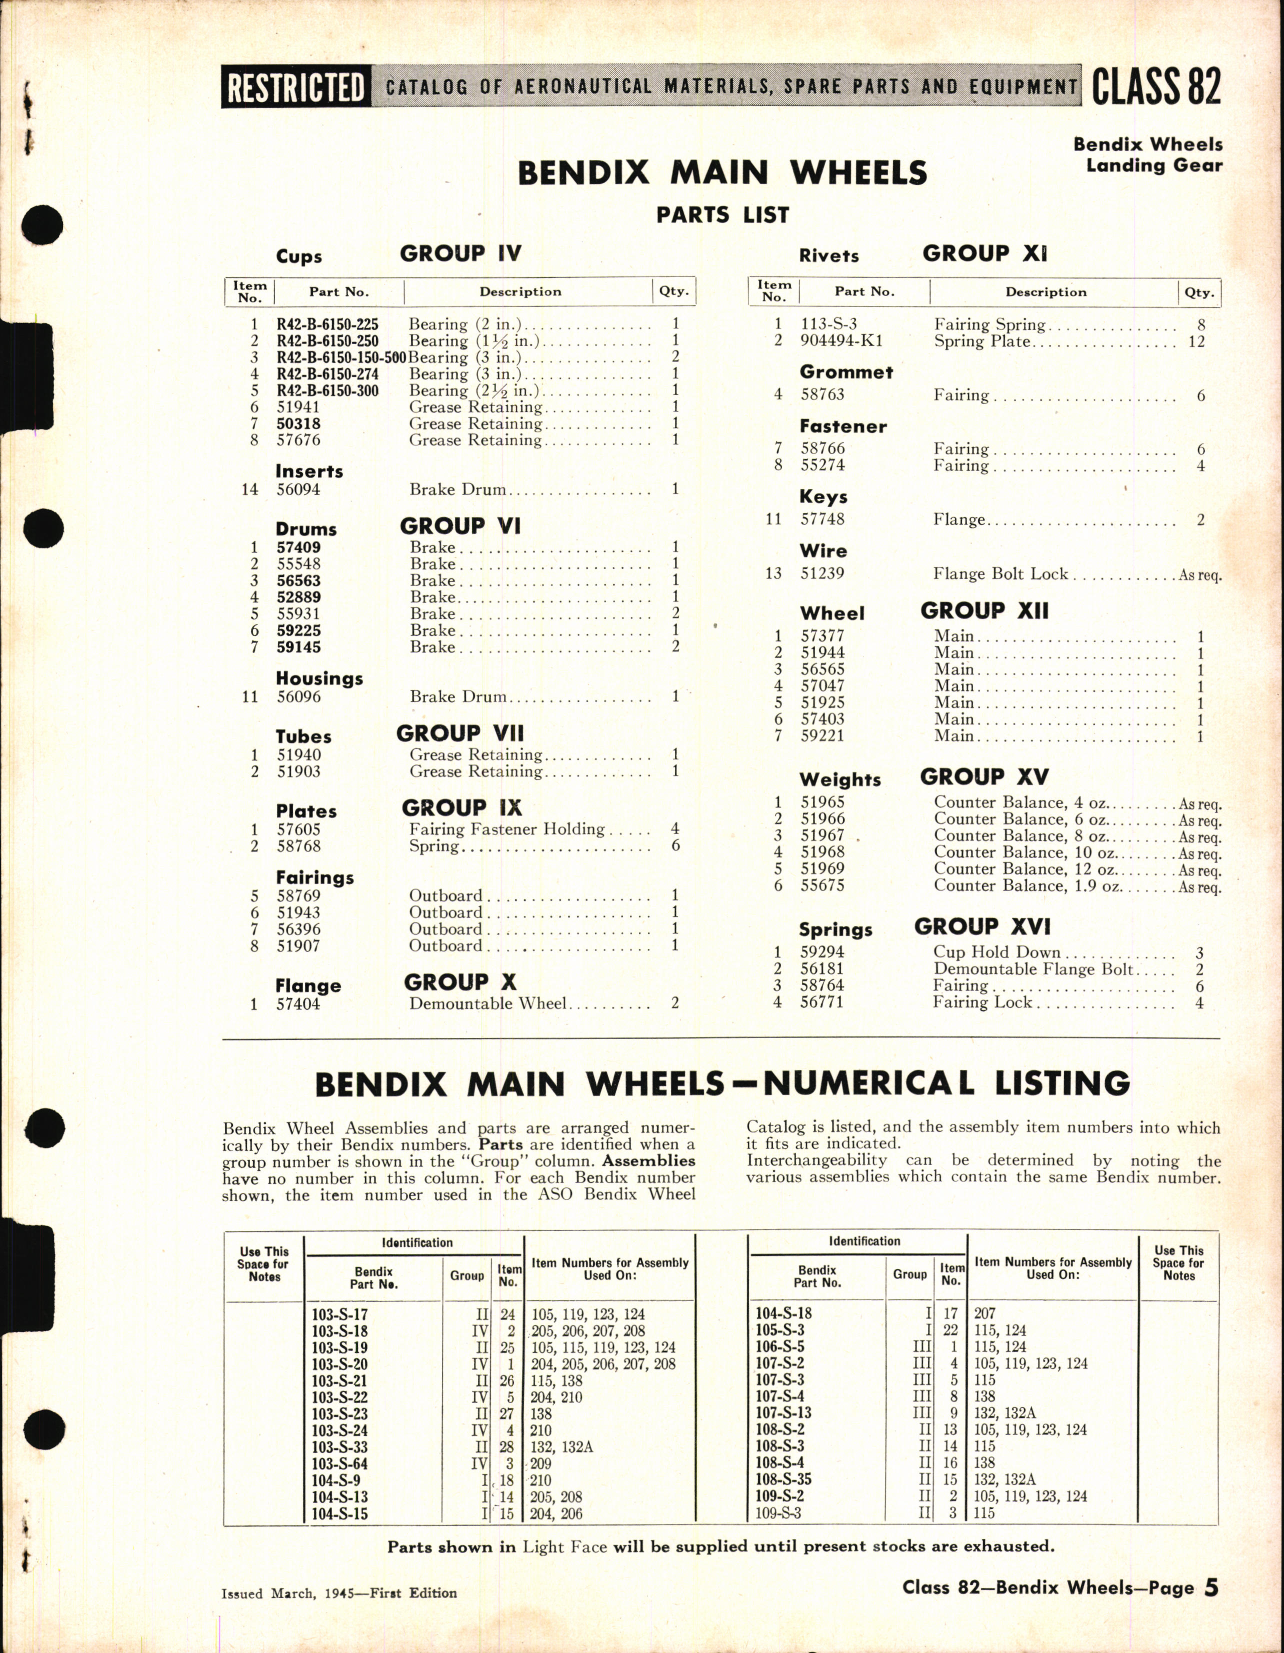 Sample page 5 from AirCorps Library document: Bendix Main Wheels